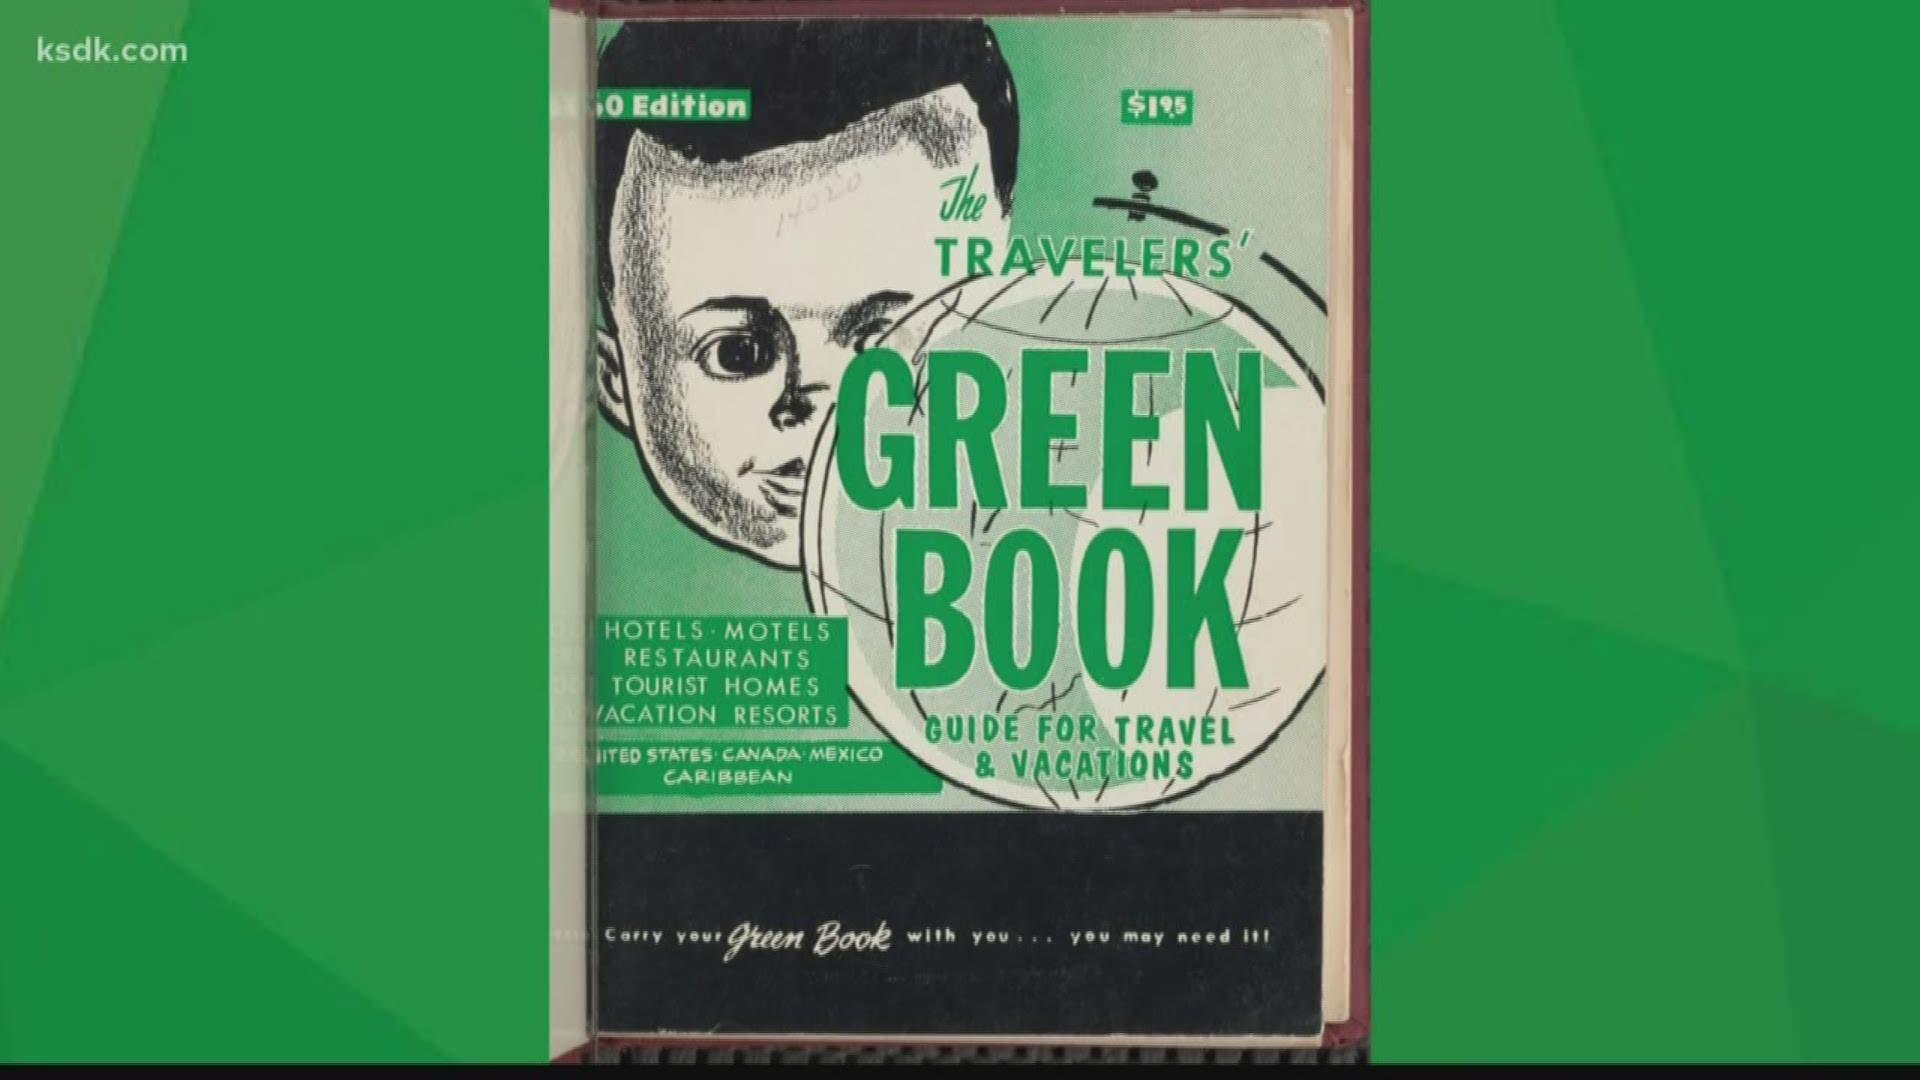 Stopping at the wrong hotel or restaurant could literally be a matter of life or death. That’s the historical context that led to The Negro Motorist Green Book